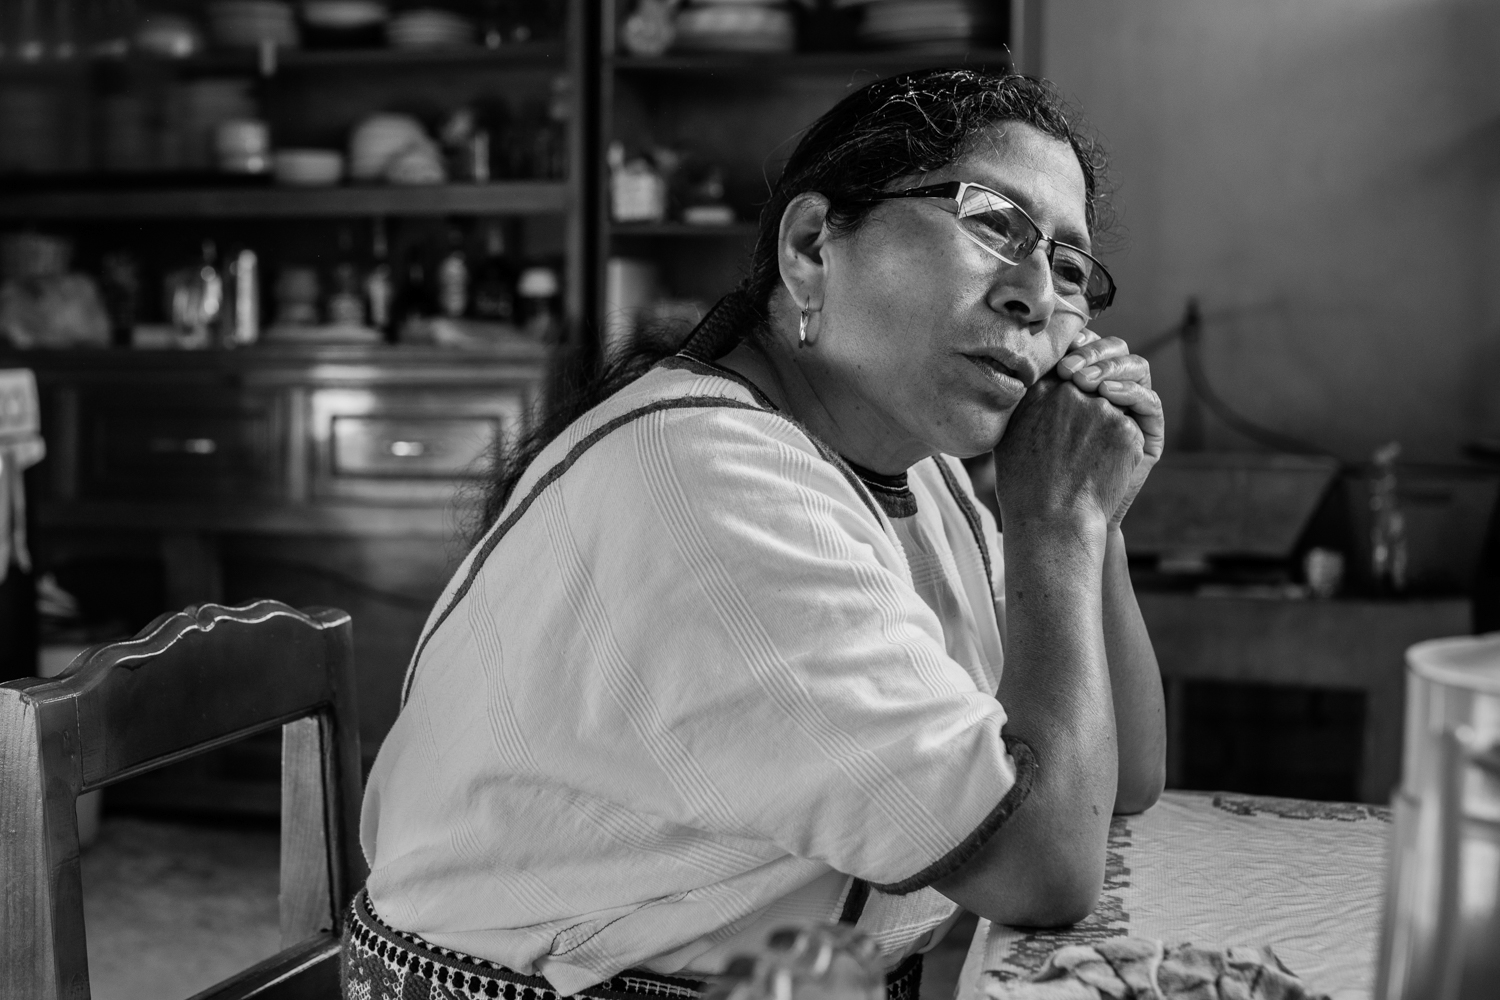 A Mixe woman reflects on her time in Milwaukee. She lived and worked there with her children until she had made enough money to build a house back home for her family. Her son stayed in Milwaukee with his wife and children, so she lives alone. Tamazulapam del Espiritu Santo, Oaxaca, Mexico.